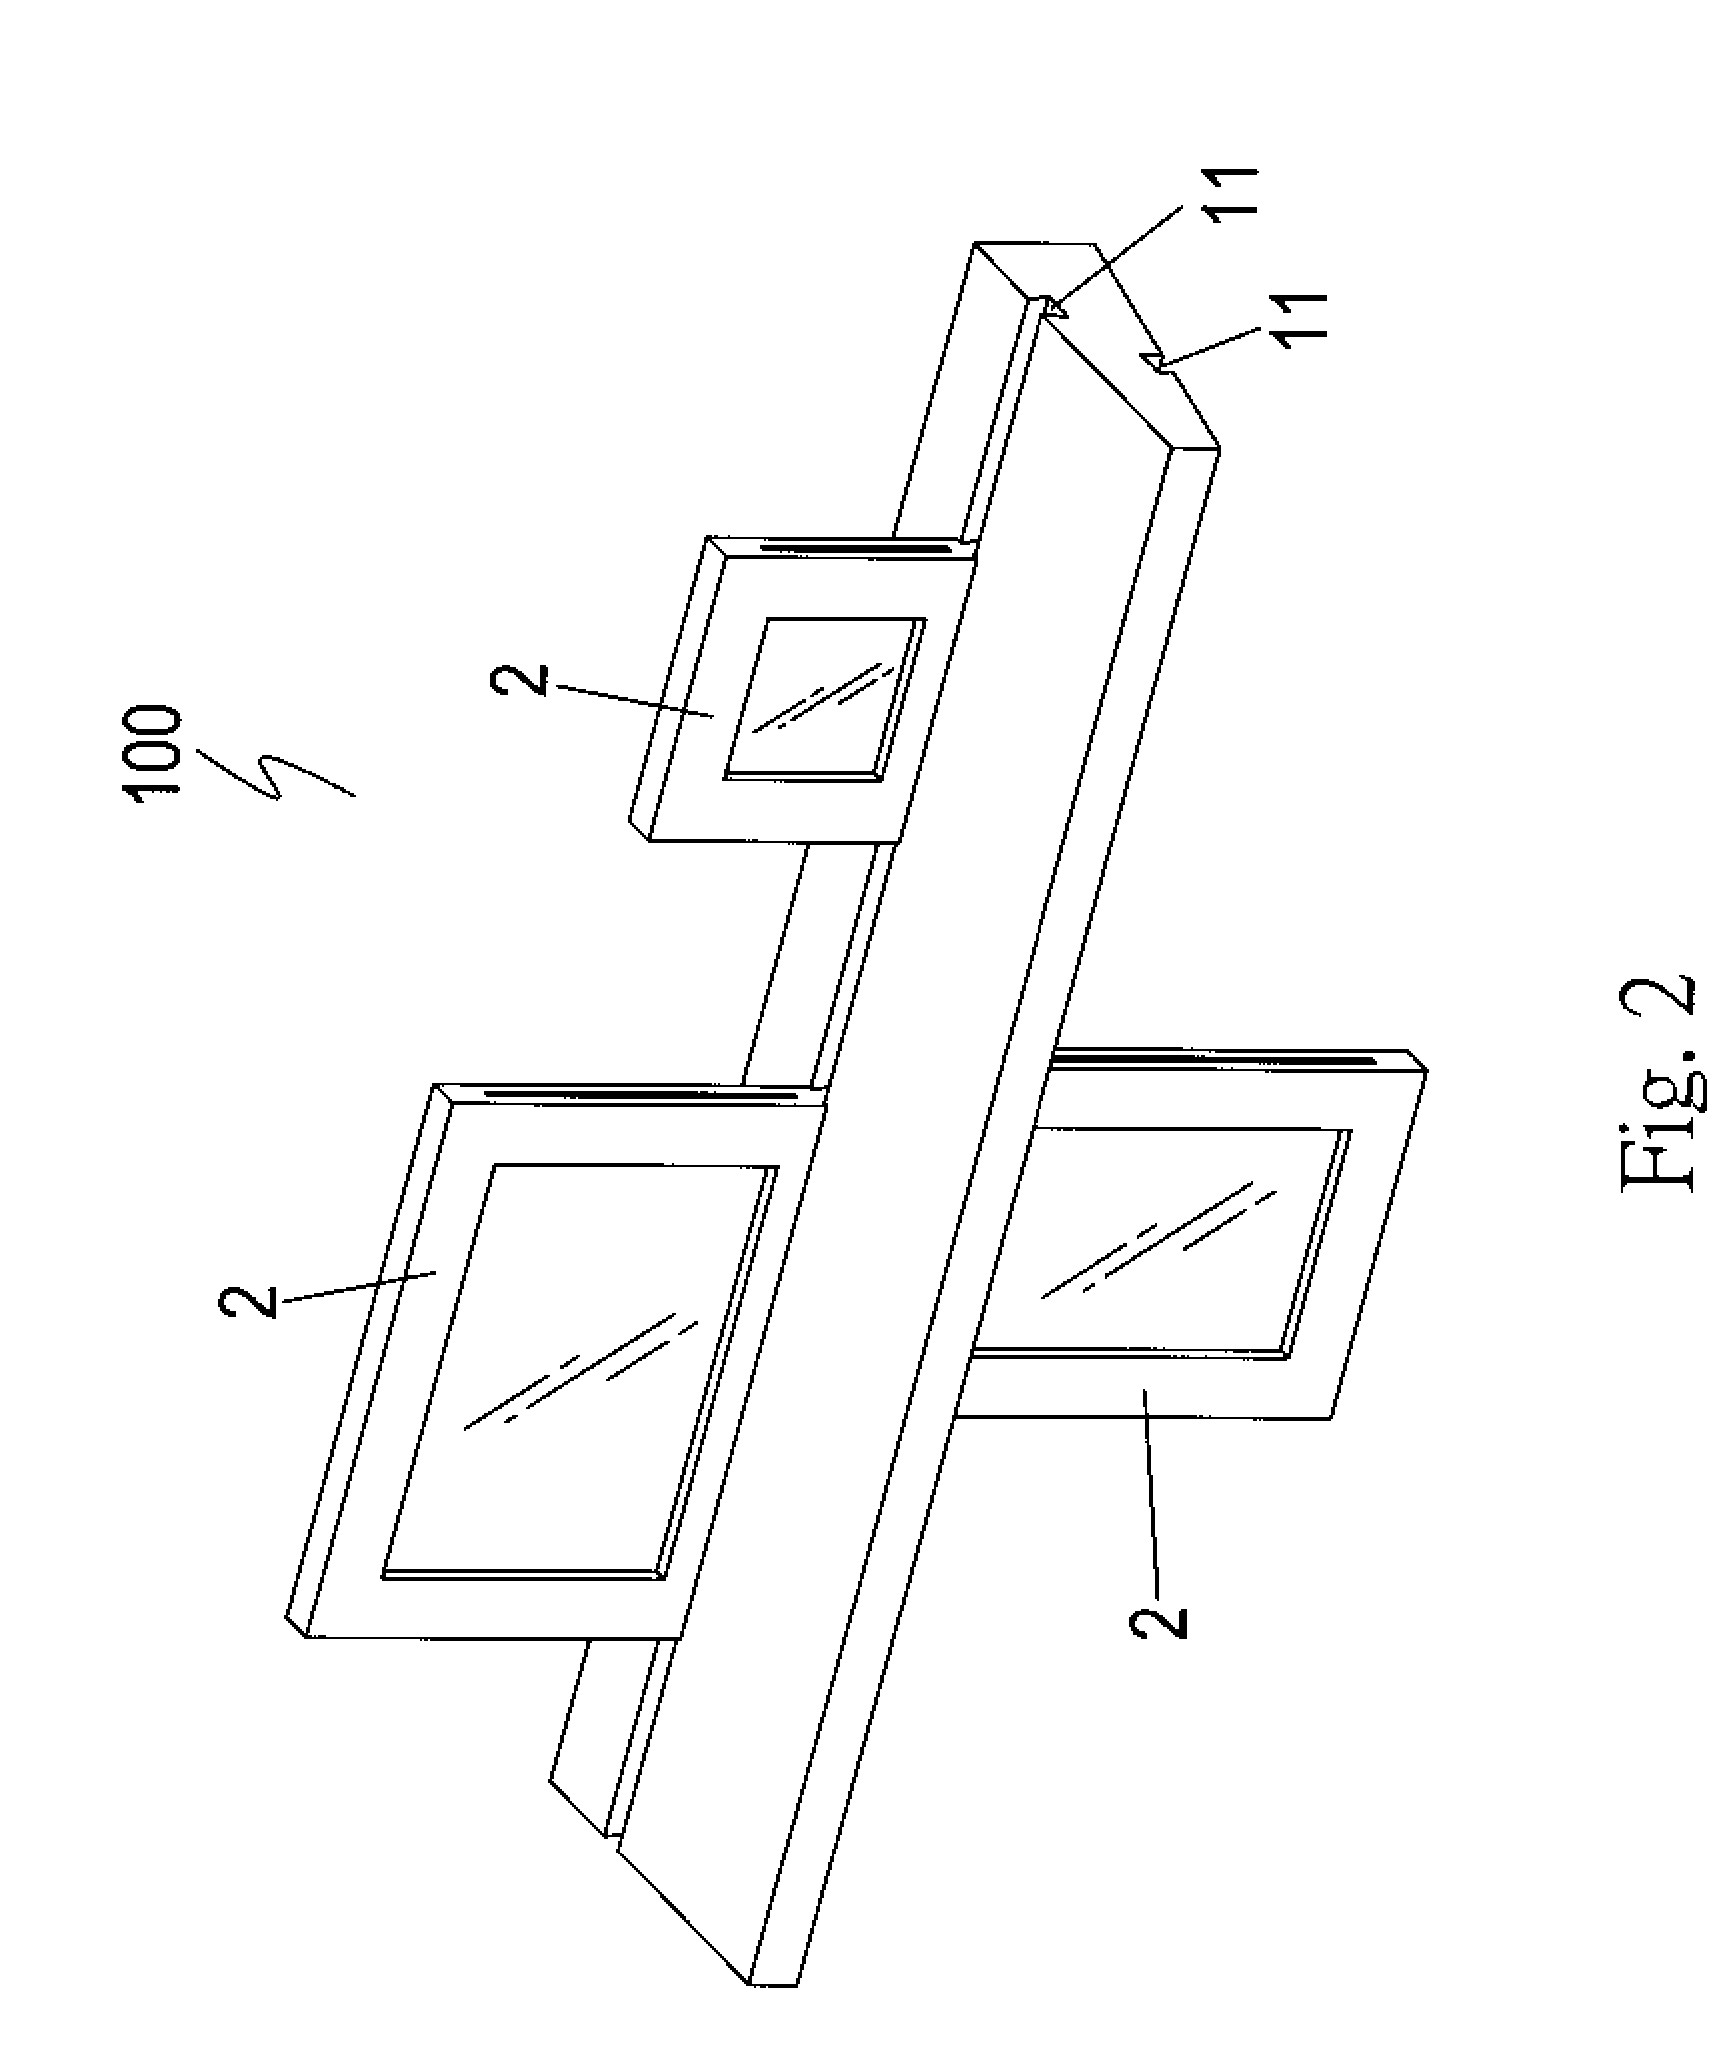 Supporting plate with at least one sliding track and capable of being installed to a wall